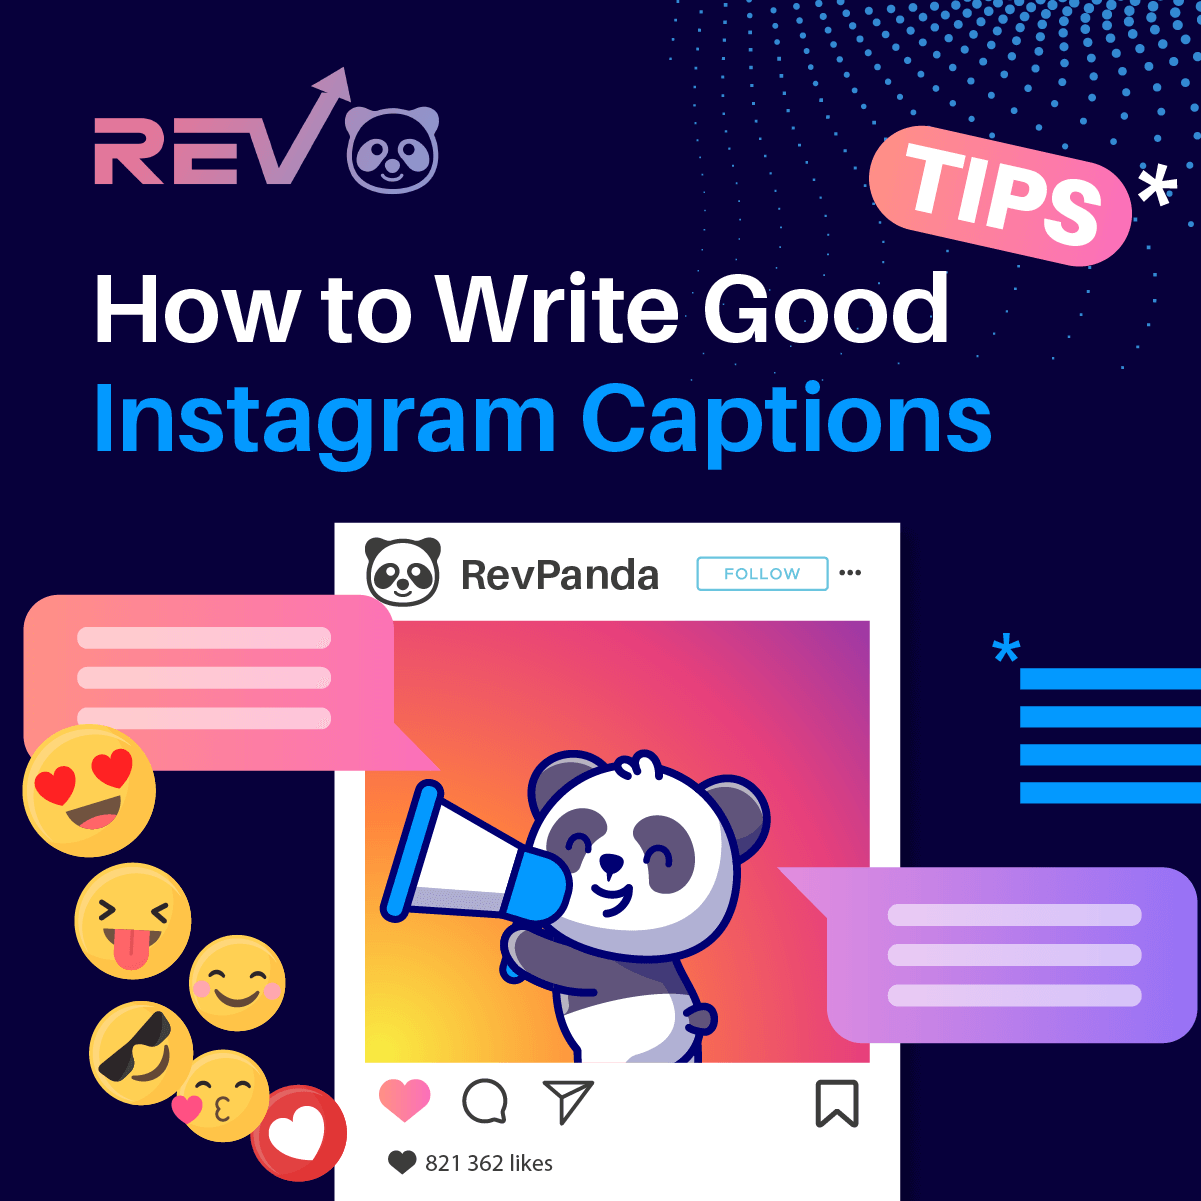 5 Tips on How to Write Good Instagram Captions